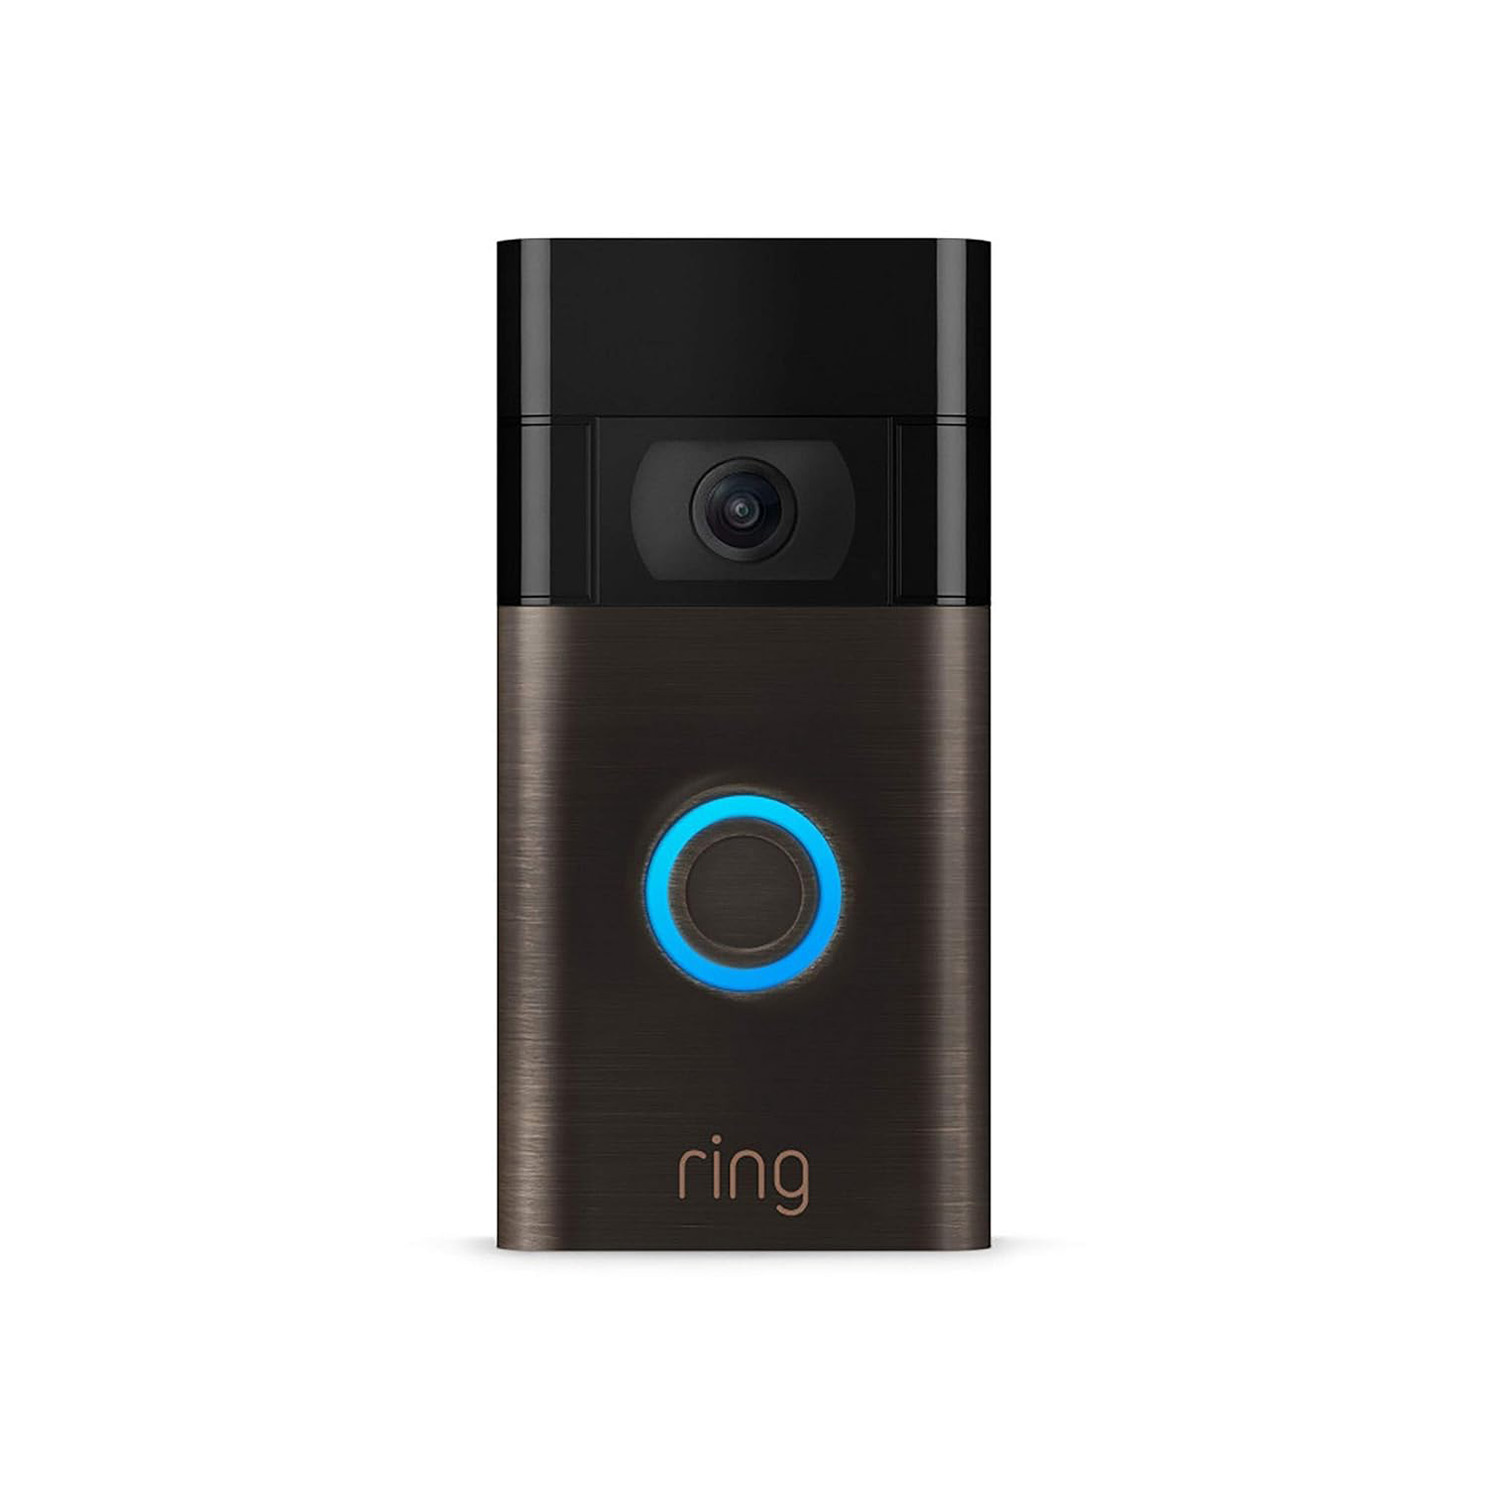 Ring Video Doorbell - 1080p HD video, improved motion detection, easy installation